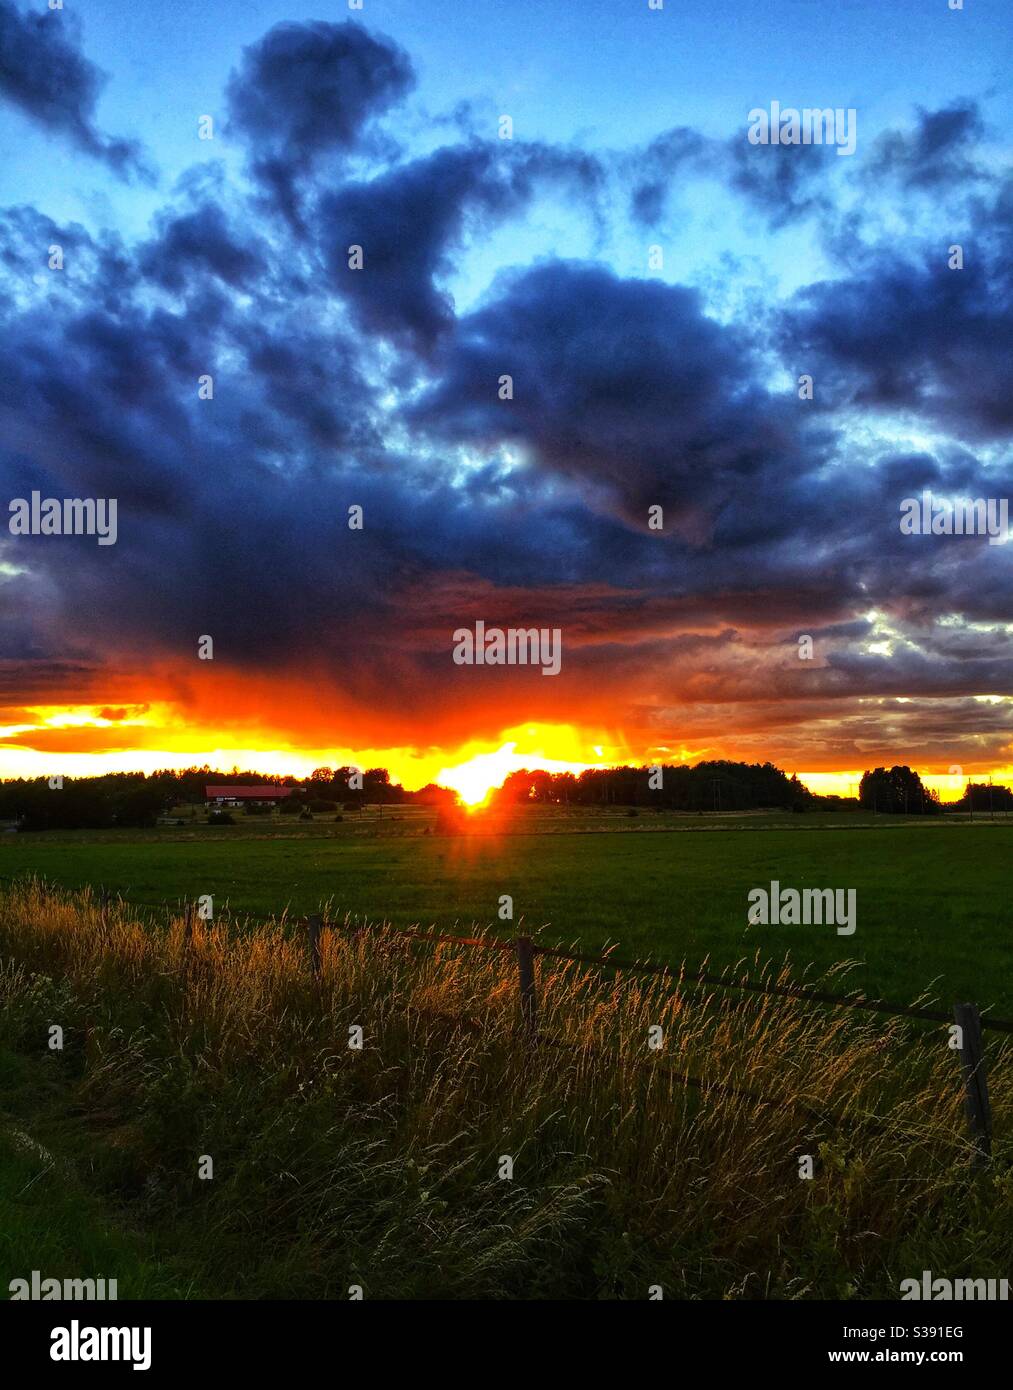 Sunset Over Rural Farming Fields In Marsta Stockholm County In Sweden Farm With A Barn In The Background Stock Photo Alamy